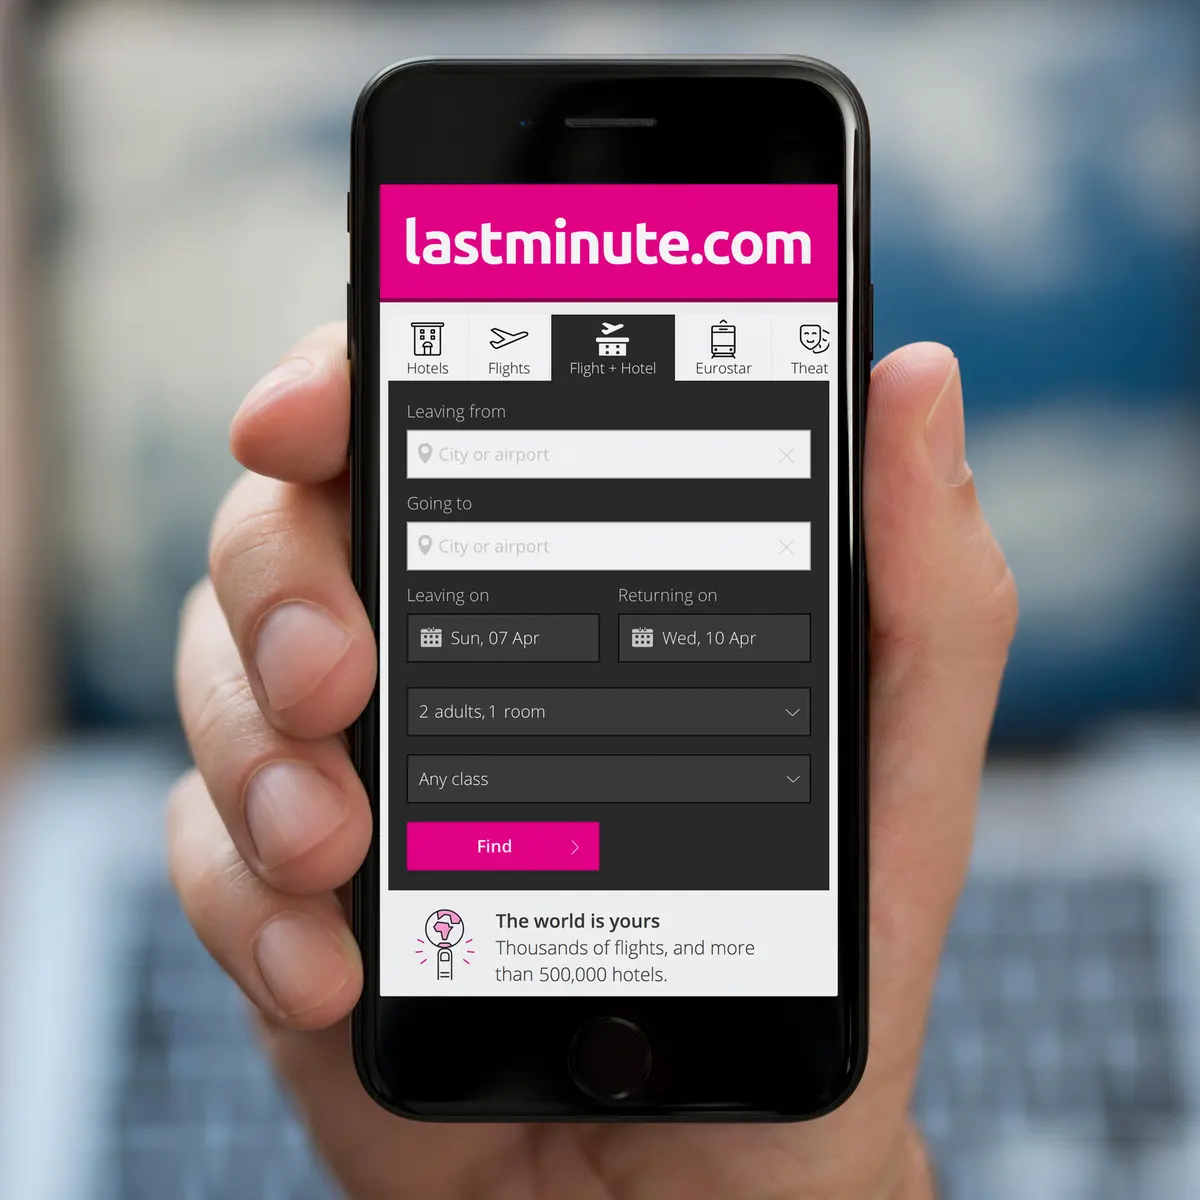 Lastminute.com €250 Gift Card IE